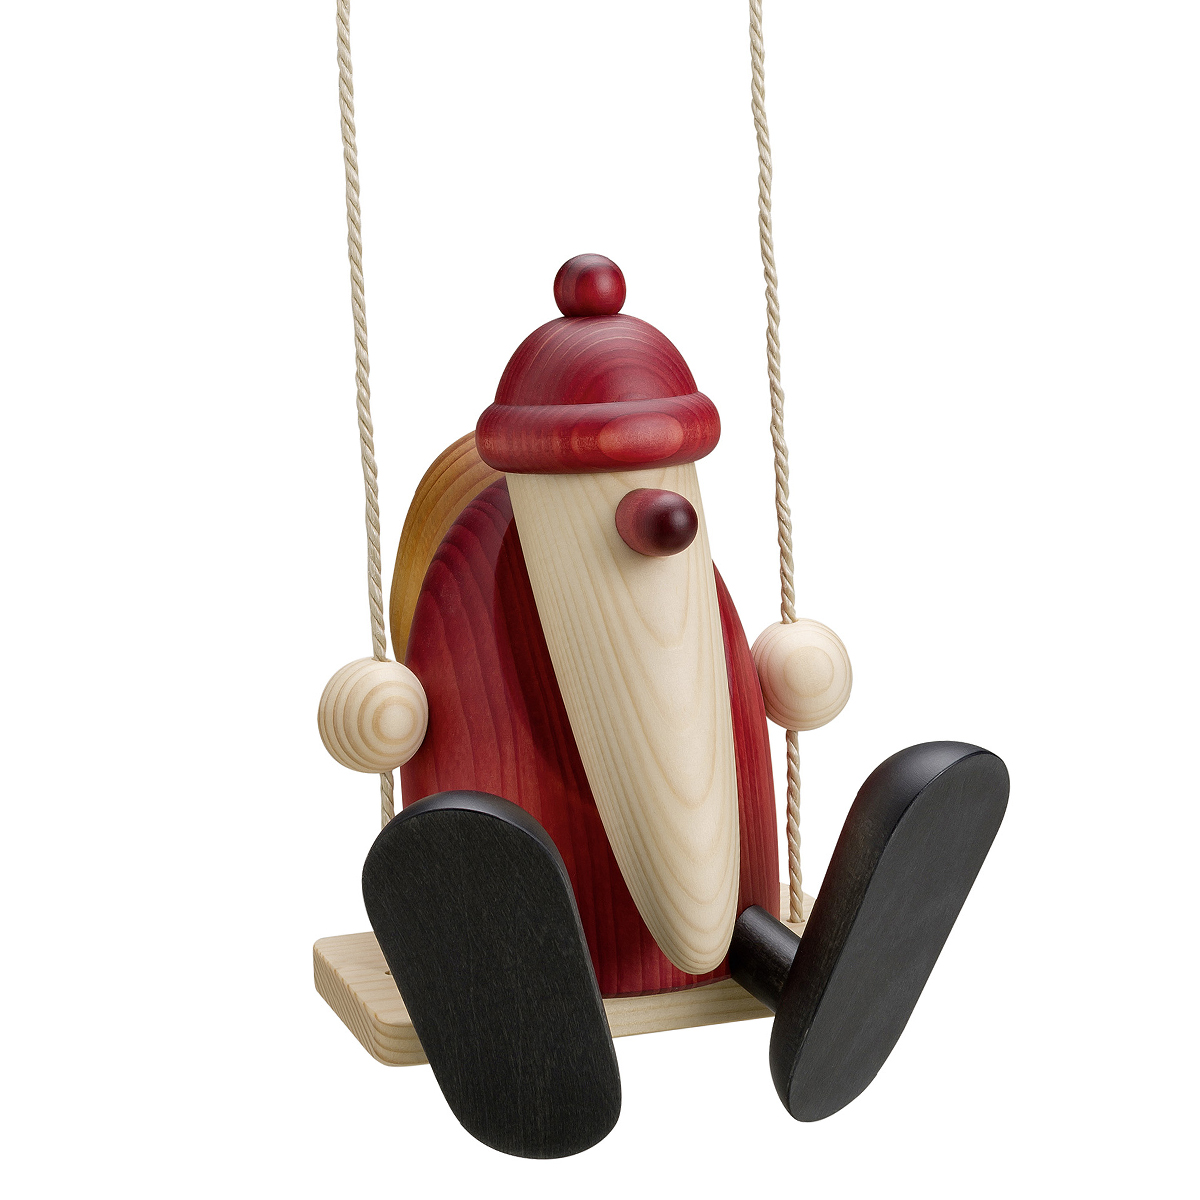  Santa Claus on a swing, large